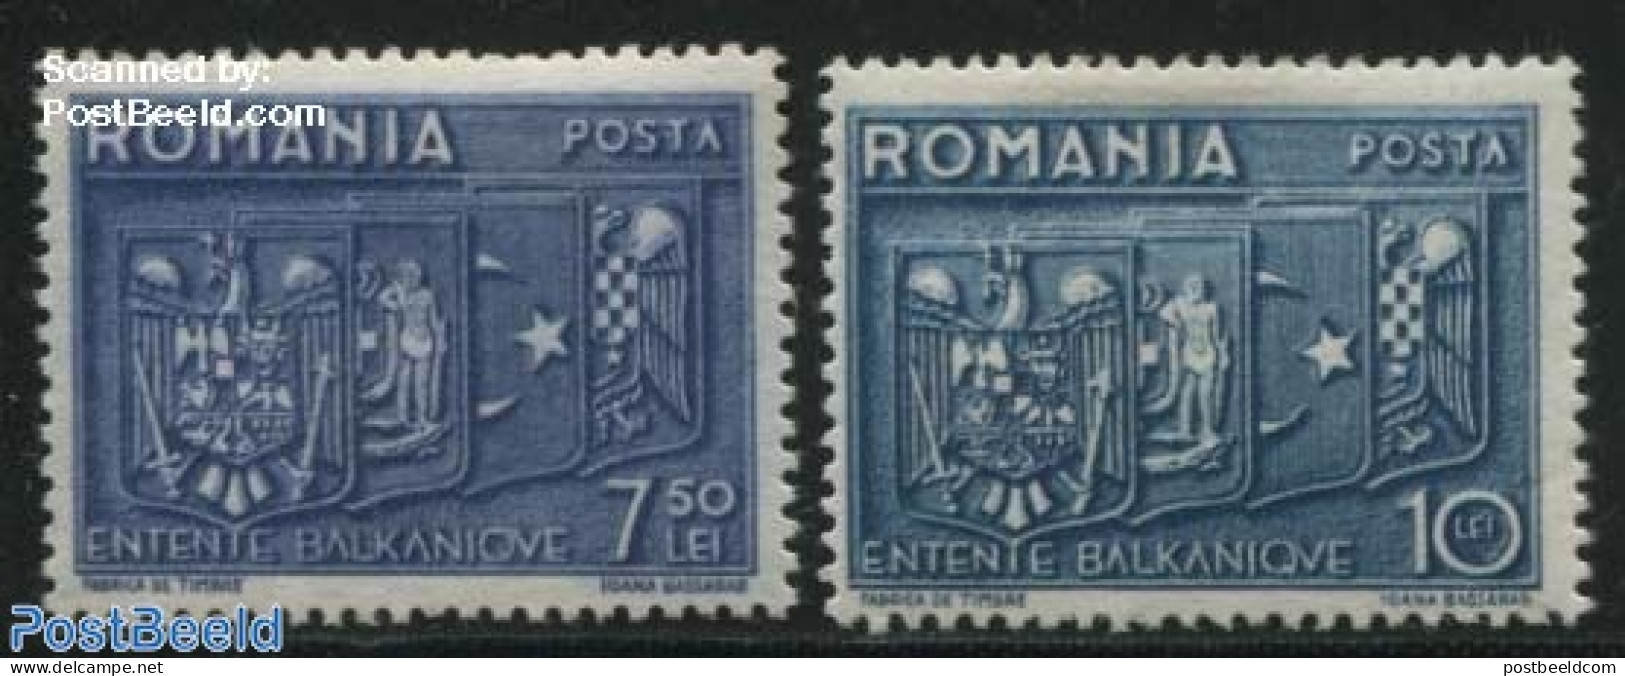 Romania 1938 Balkan Entente 2v, Mint NH, History - Various - Coat Of Arms - Europa Hang-on Issues - Joint Issues - Unused Stamps